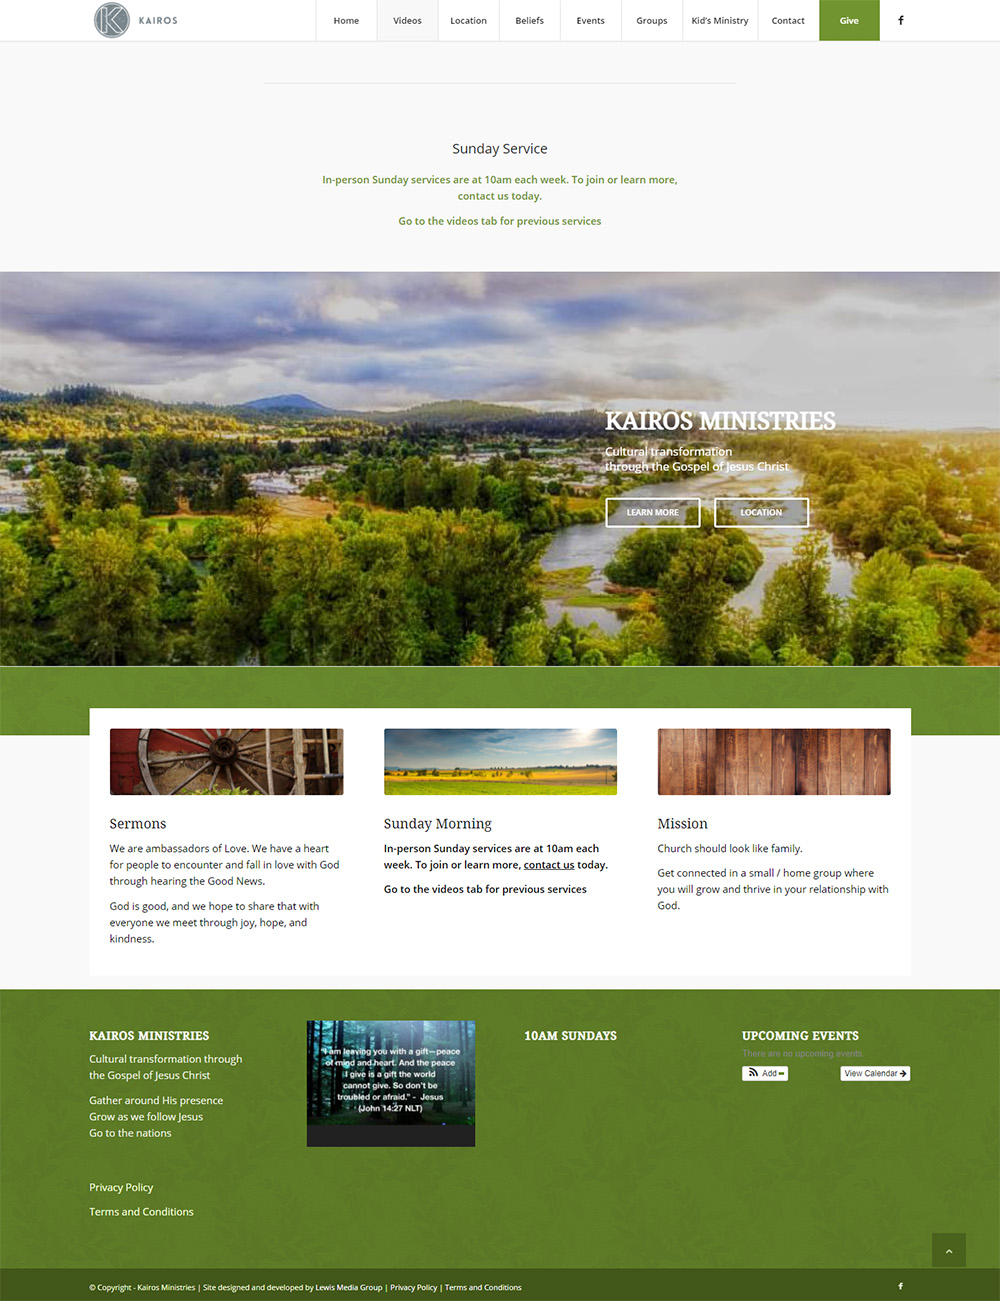 Kairos Ministries Home page before redesign